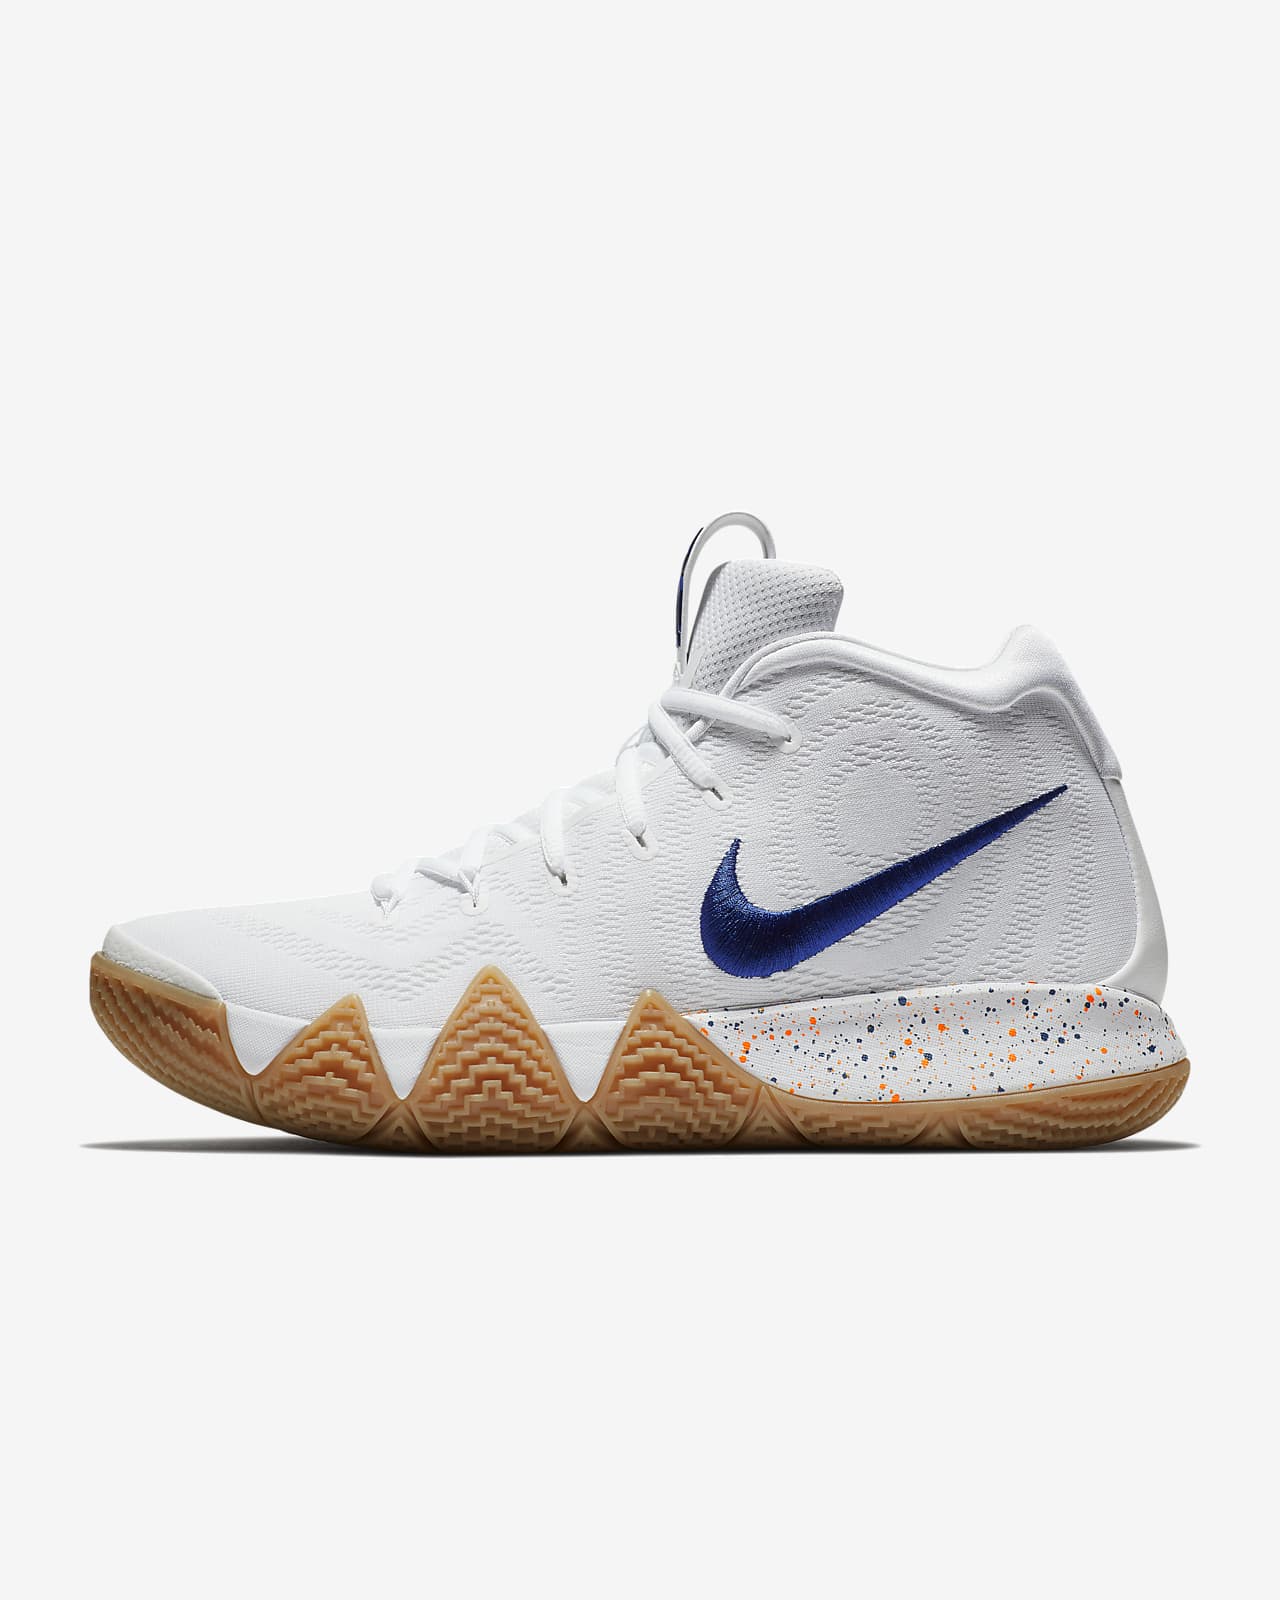 kyrie 4 uncle drew size 8